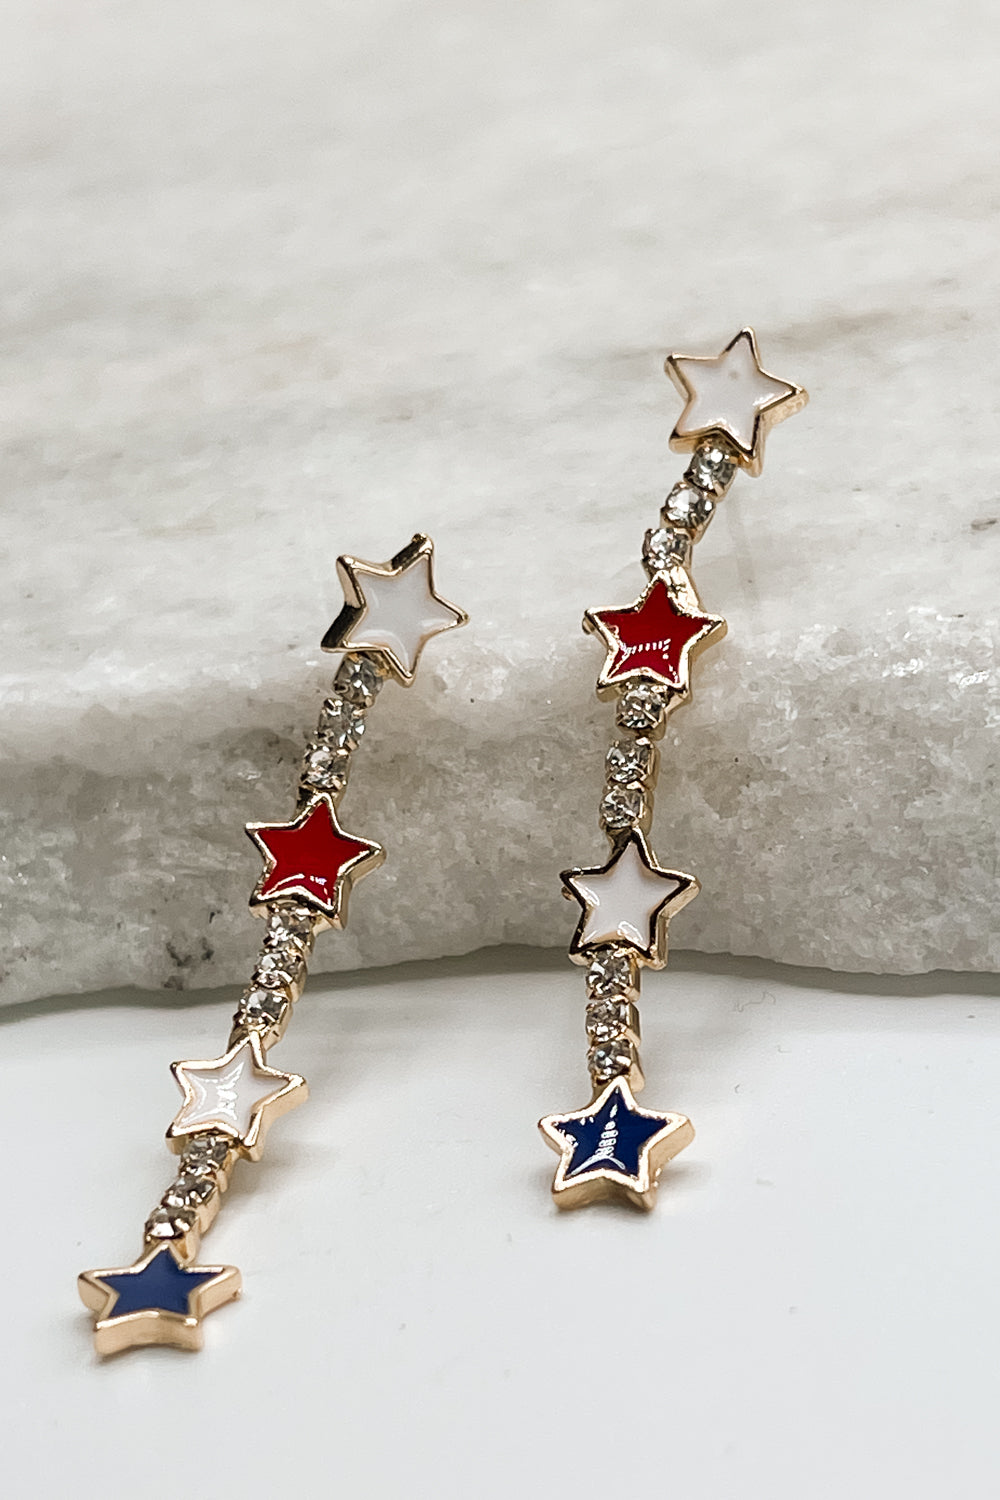 Image shows the Liberty Red, White, & Blue Star Earrings against a marble background. These earrings have 2 white stars, a red star, and a blue star in a vertical dangling line with rhinestones in between.